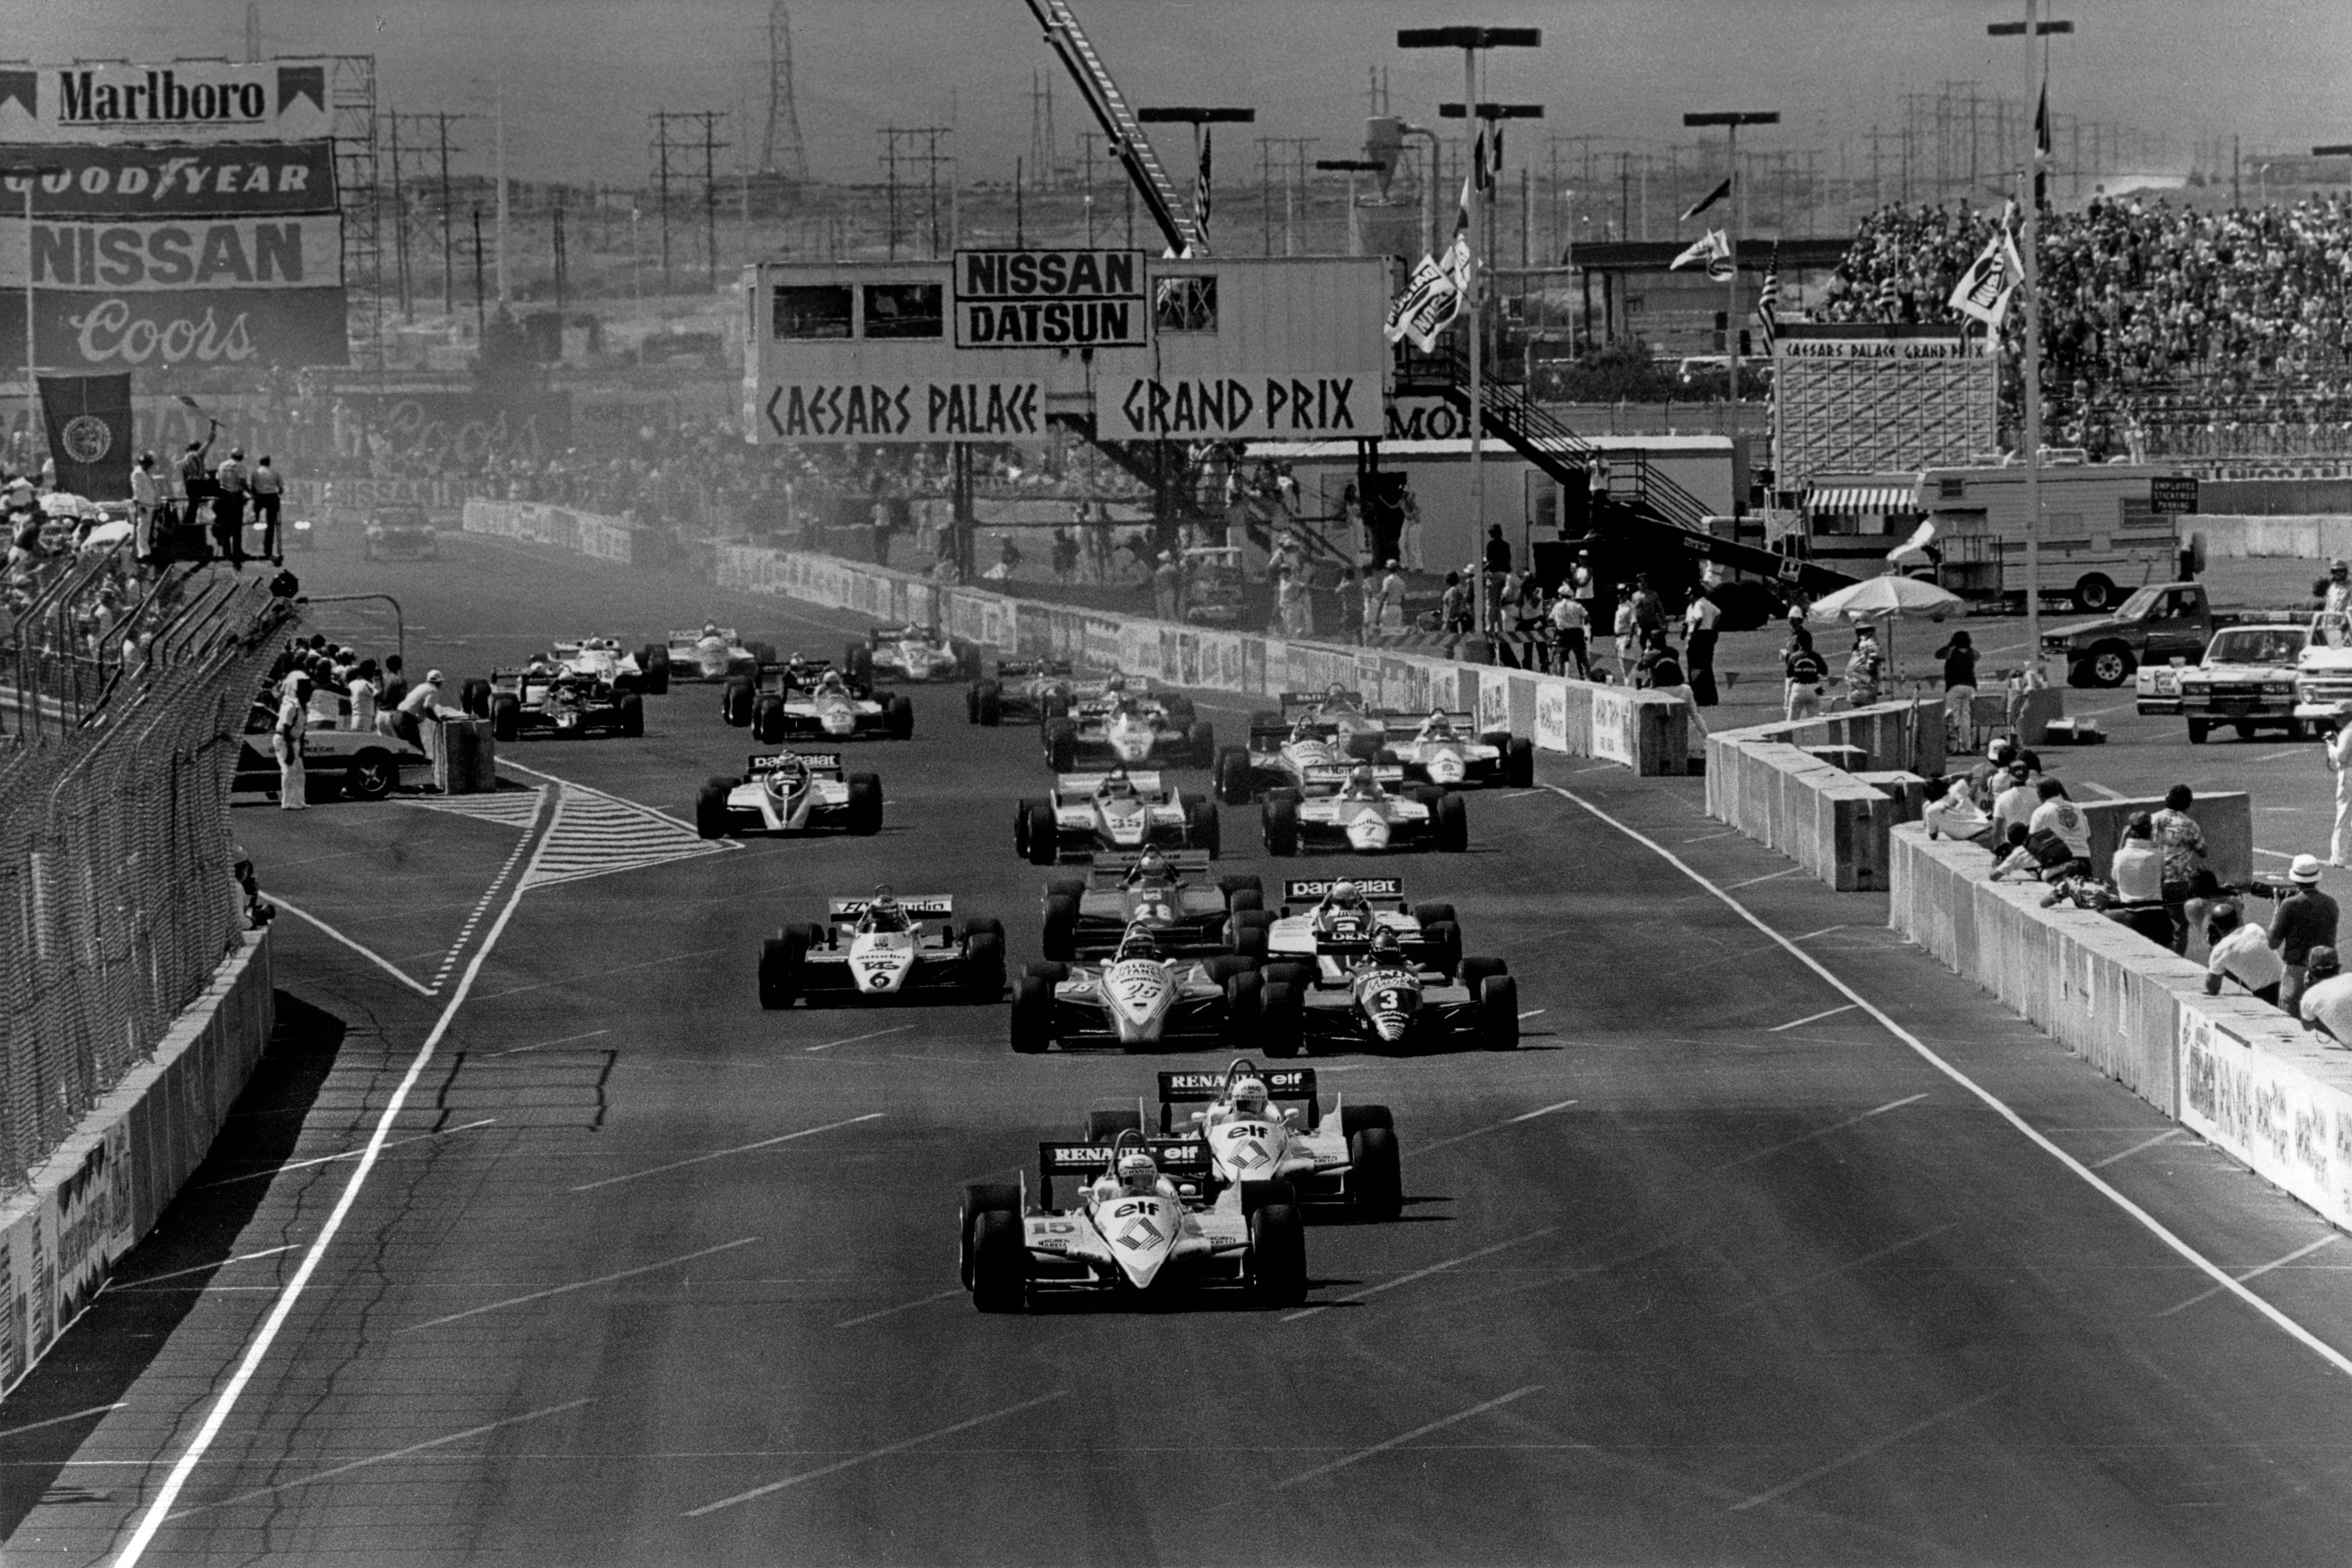 The Caesars Palace Grand Prix took place in the Las Vegas hotel’s parking lot in 1981 and 1982